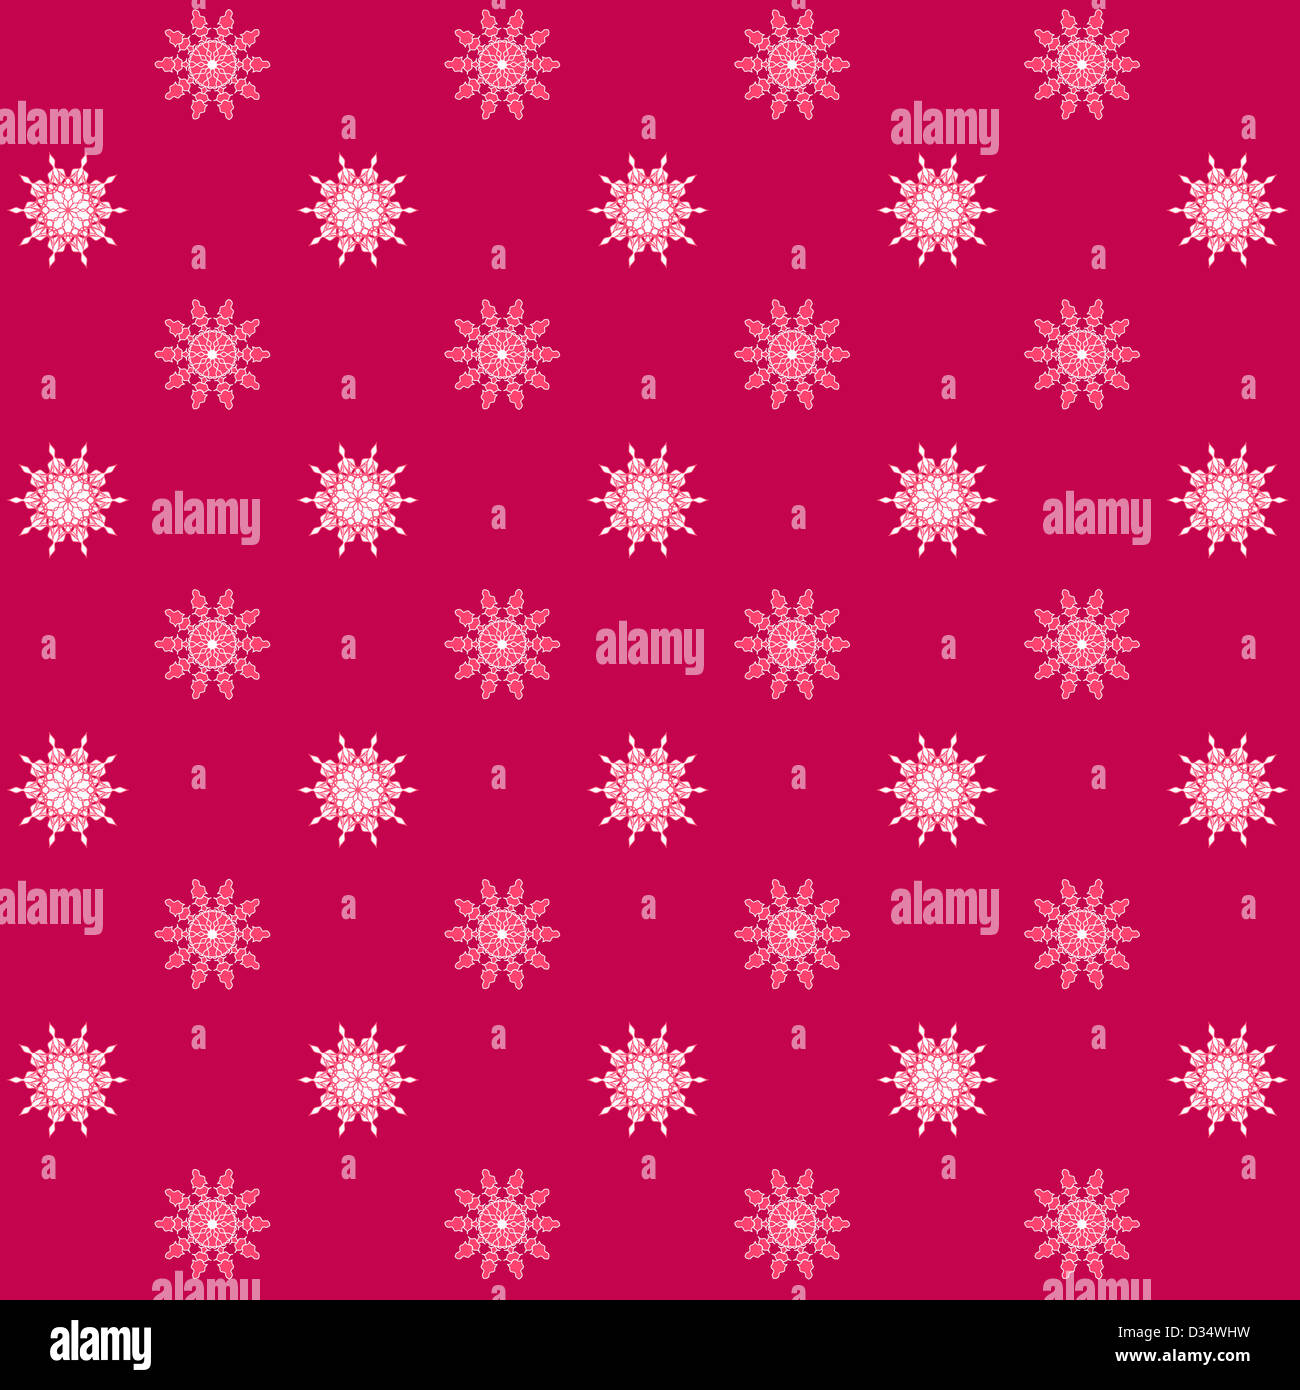 Artistic floral pattern on pink Stock Photo